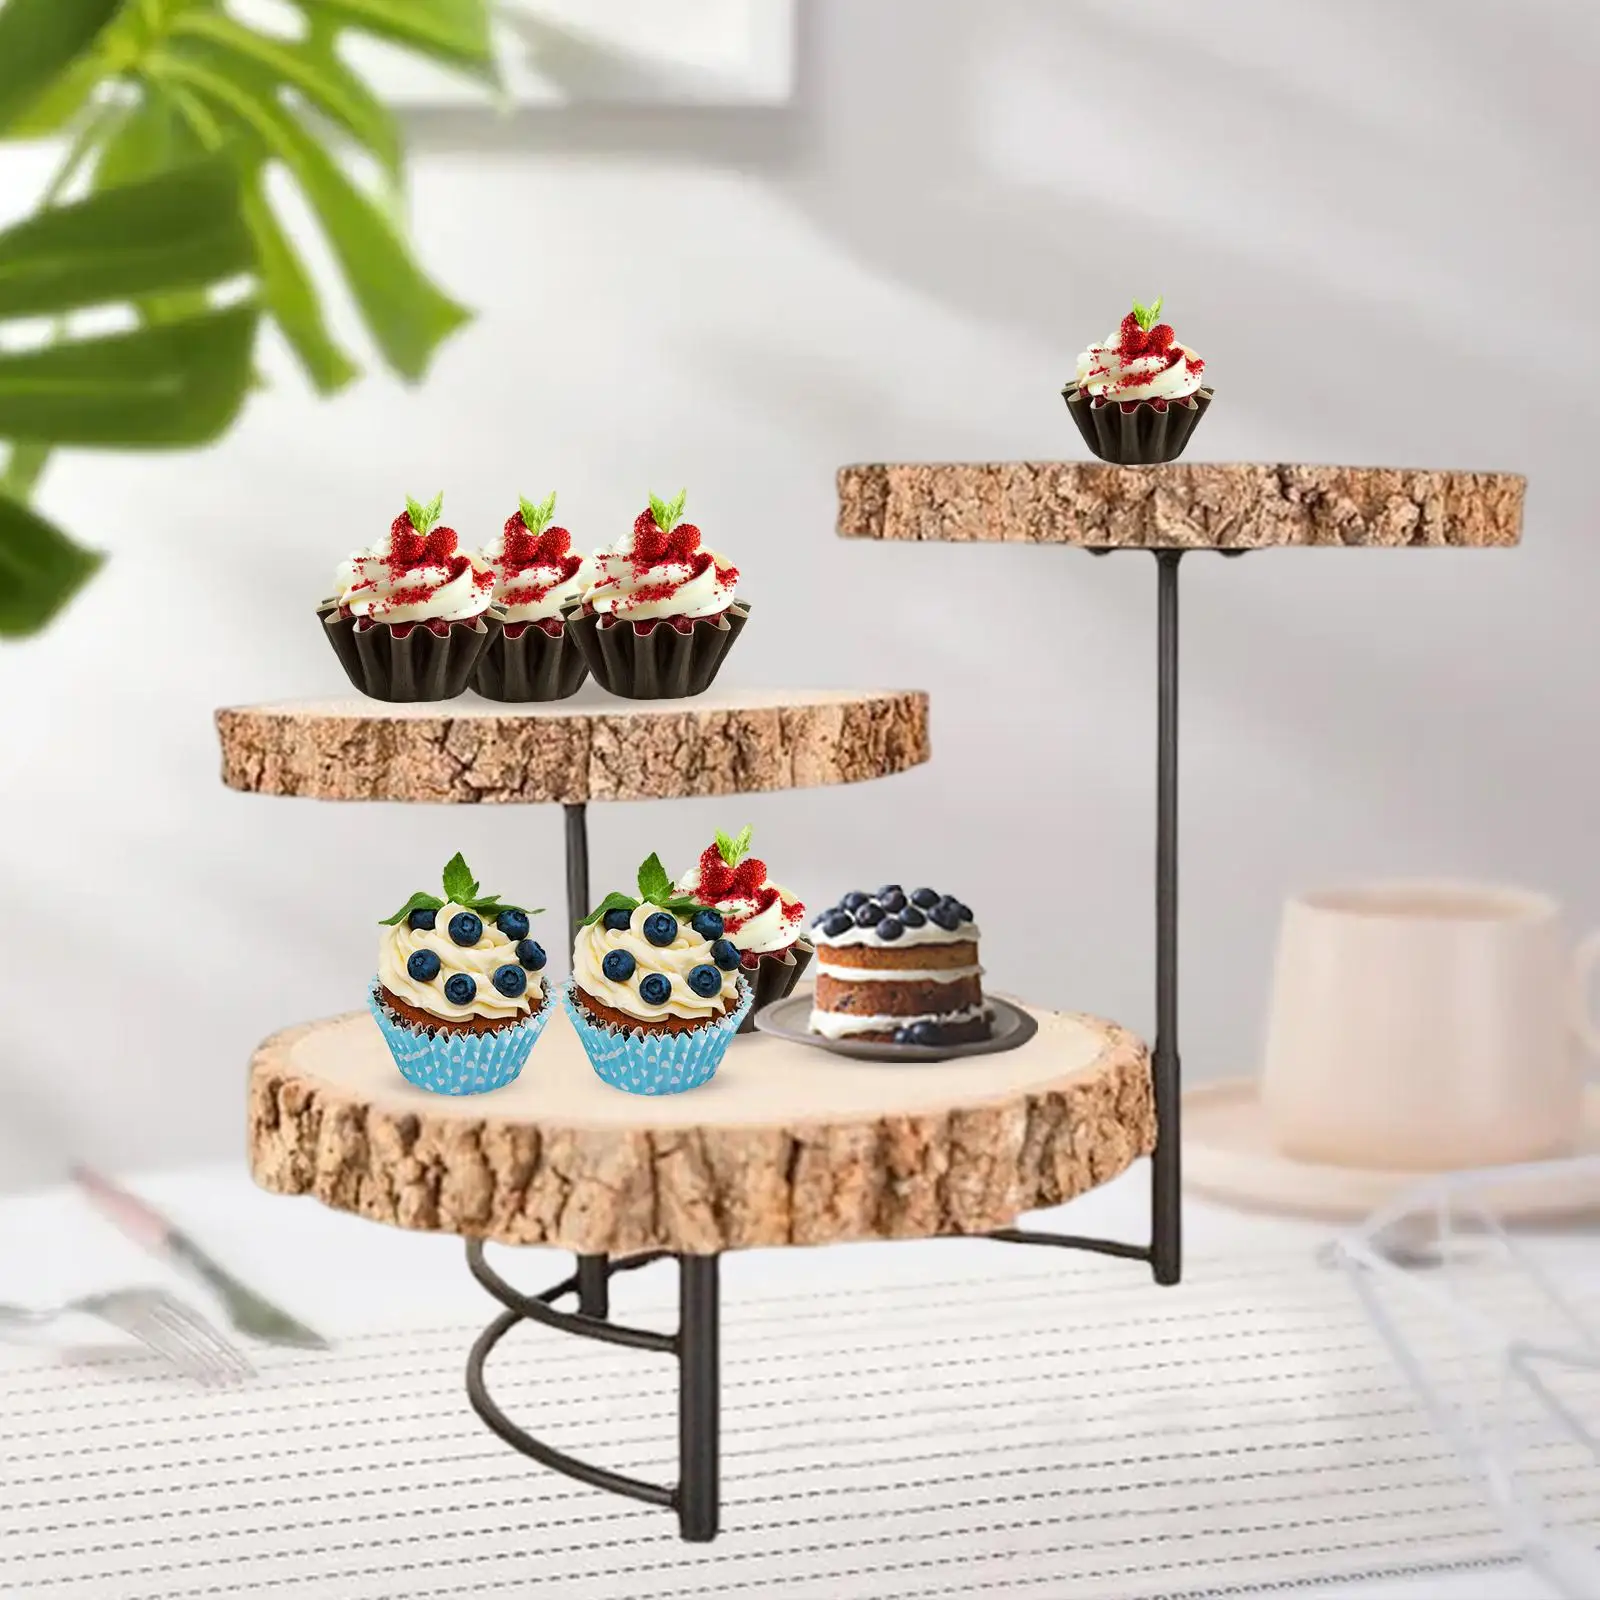 Cupcake Cake Stands 3 Layer Serving Platter Cake Plate Stand Sushi Entertaining